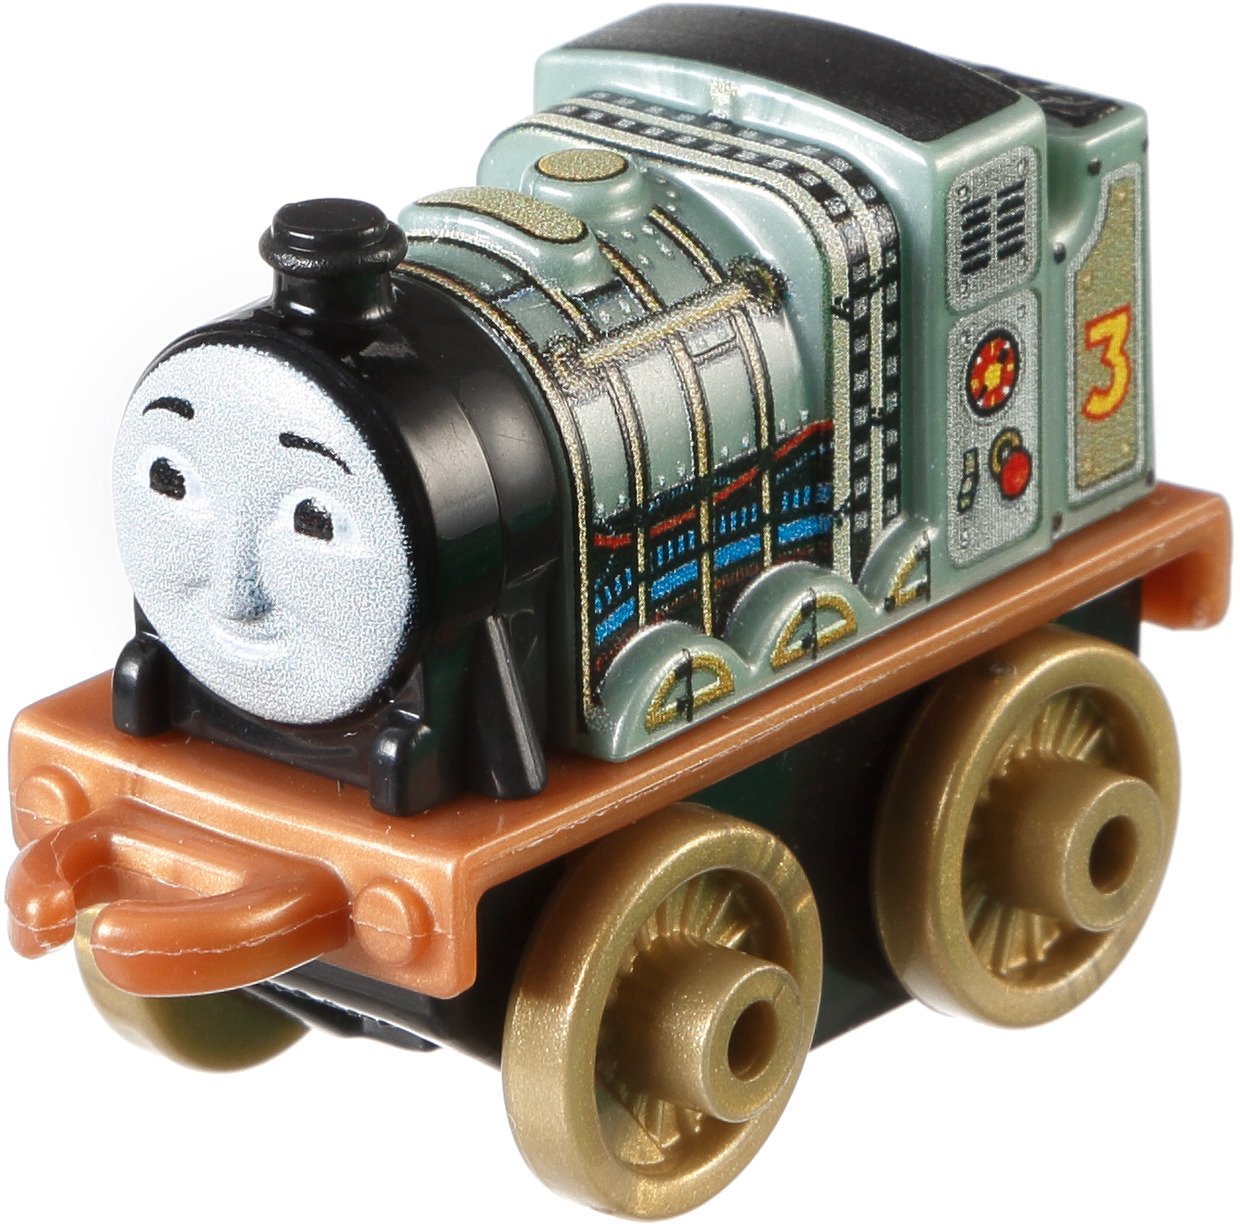 thomas and friends minis henry